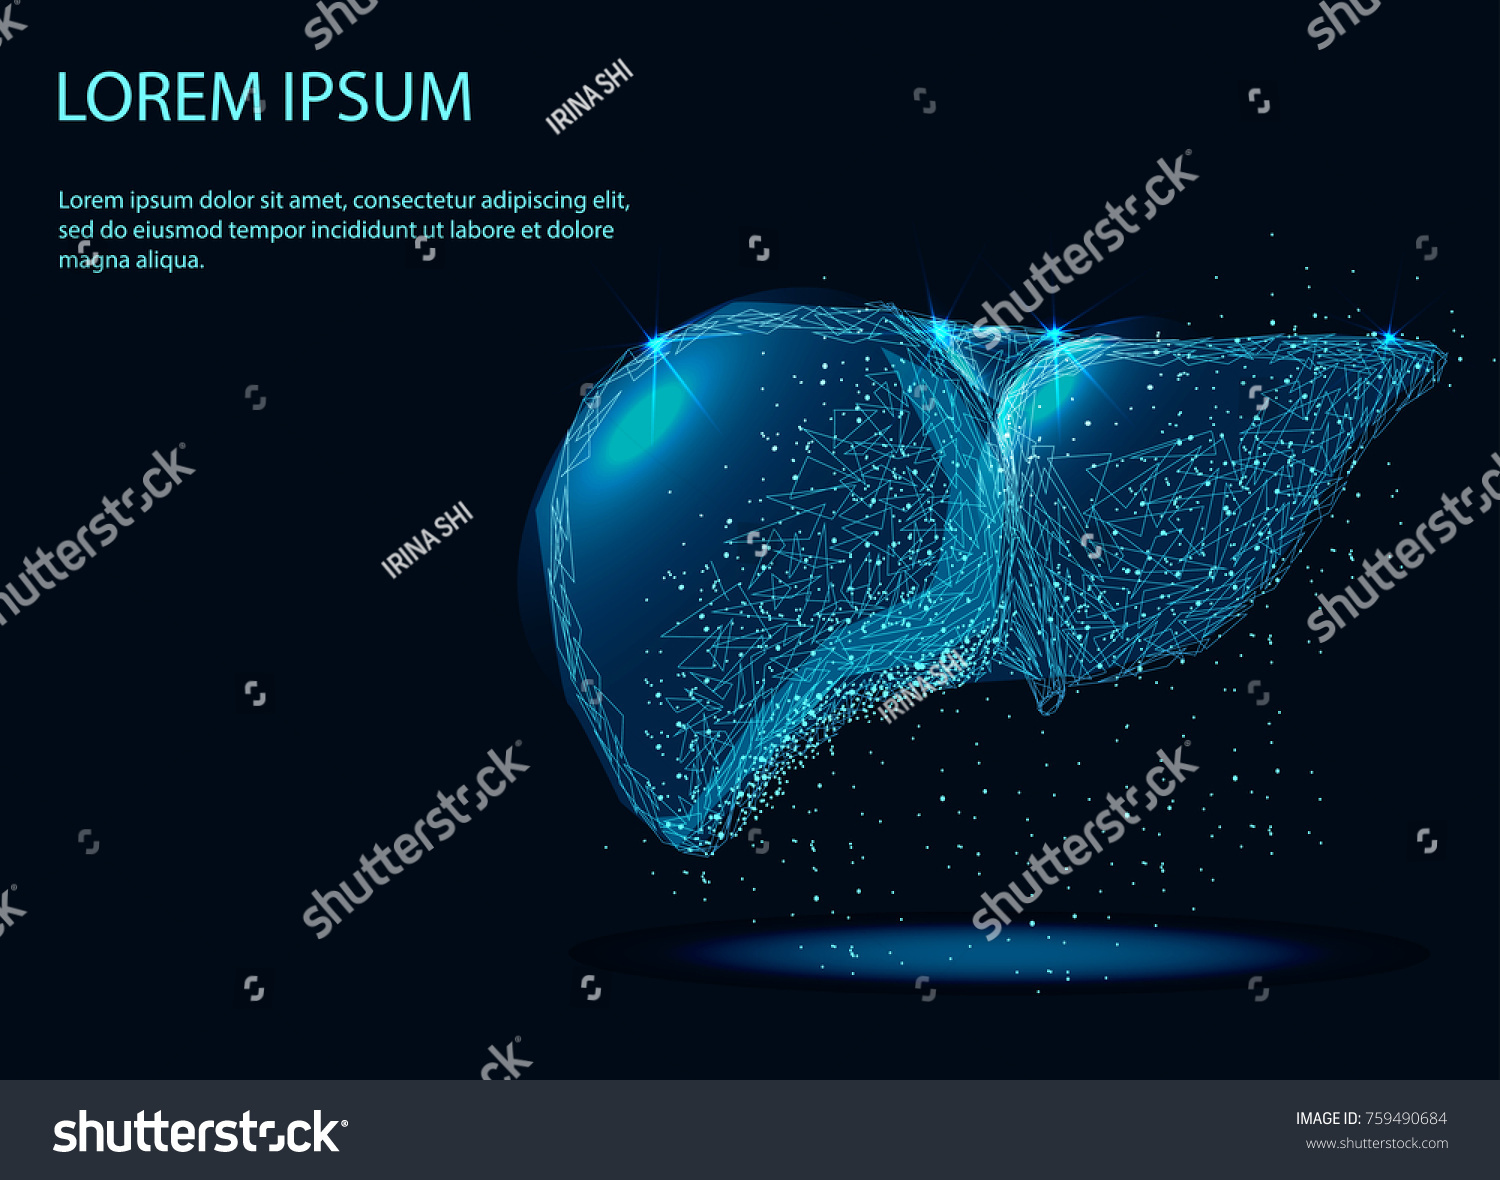 SVG of Abstract image of a Human Liver Internal Organ in the form of a starry sky or space, consisting of points, lines, and shapes in the form of planets, stars and the universe. Vector.  svg